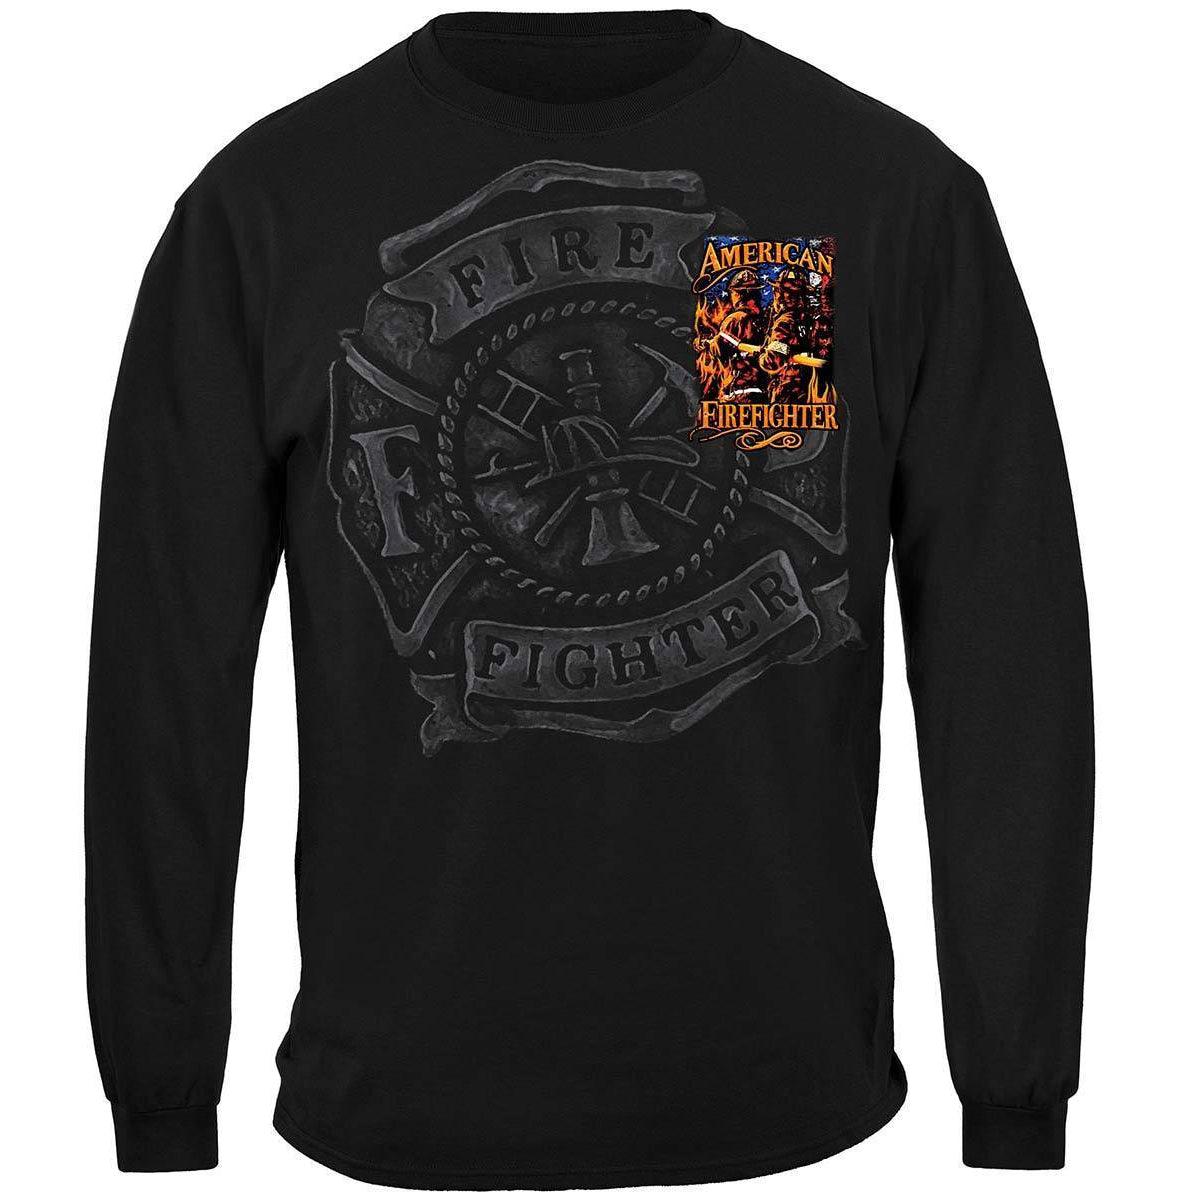 American Firefighter Hoodie - Military Republic